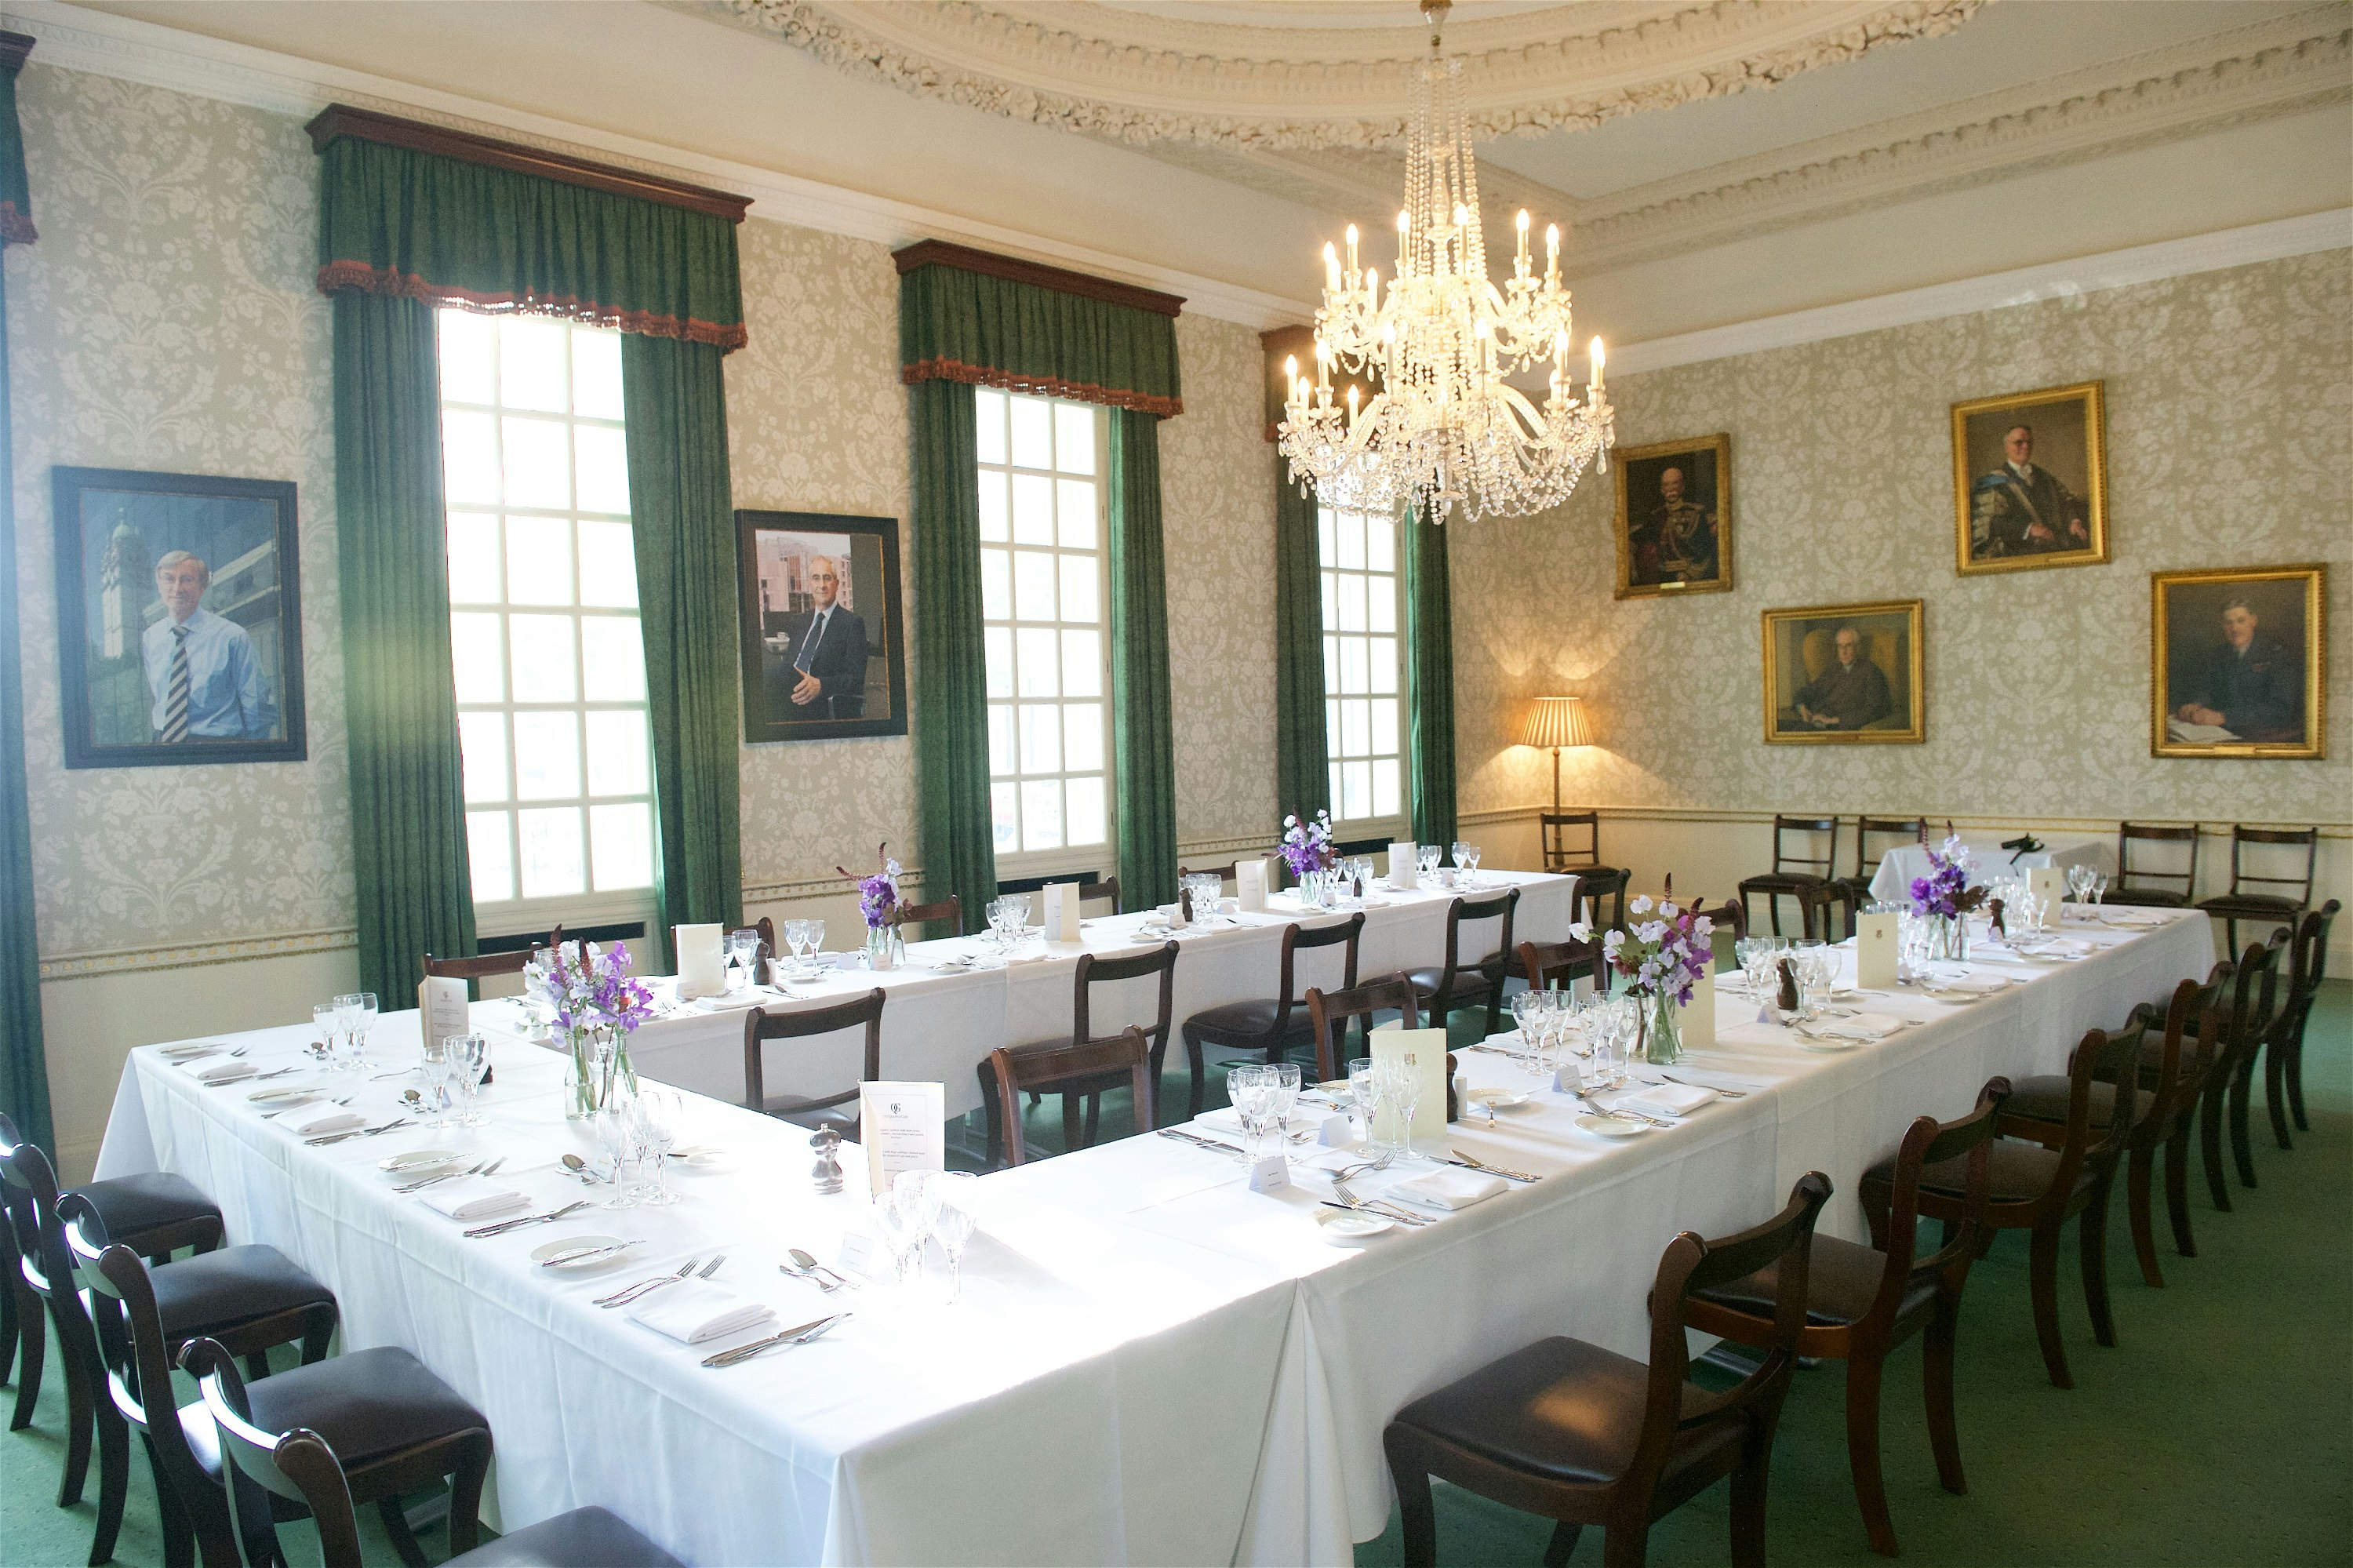 Imperial Venues - 170 Queen's Gate  - The Council Room image 2